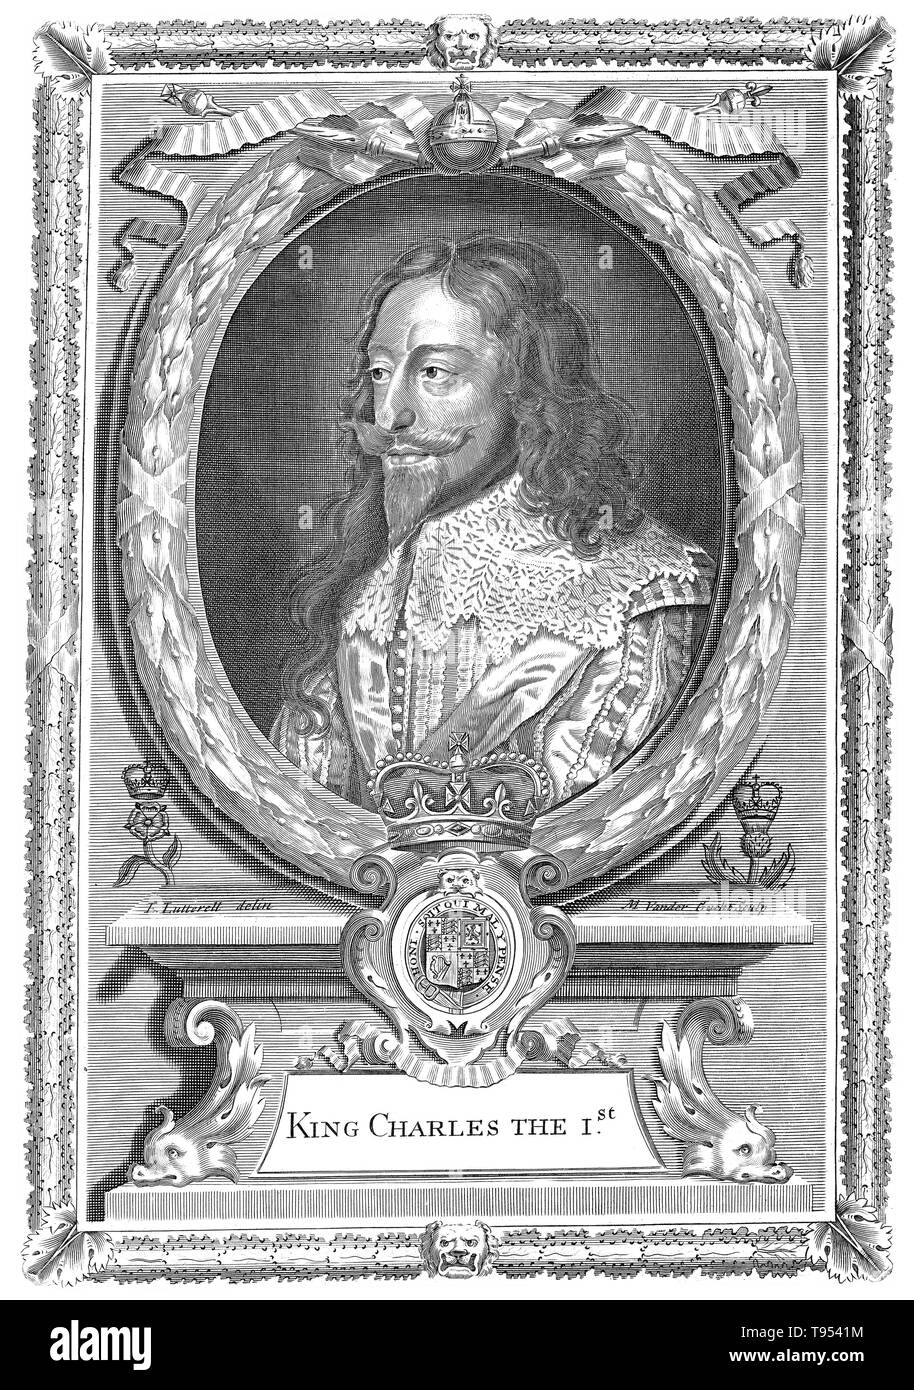 Charles I (November 19, 1600 - January 30, 1649) was monarch of the three kingdoms of England, Scotland, and Ireland from March 27, 1625 until his execution in 1649. Charles was the second son of King James VI of Scotland, but after his father inherited the English throne in 1603, he moved to England, where he spent much of the rest of his life. After his succession, Charles quarreled with the Parliament of England, which sought to curb his royal prerogative. Stock Photo